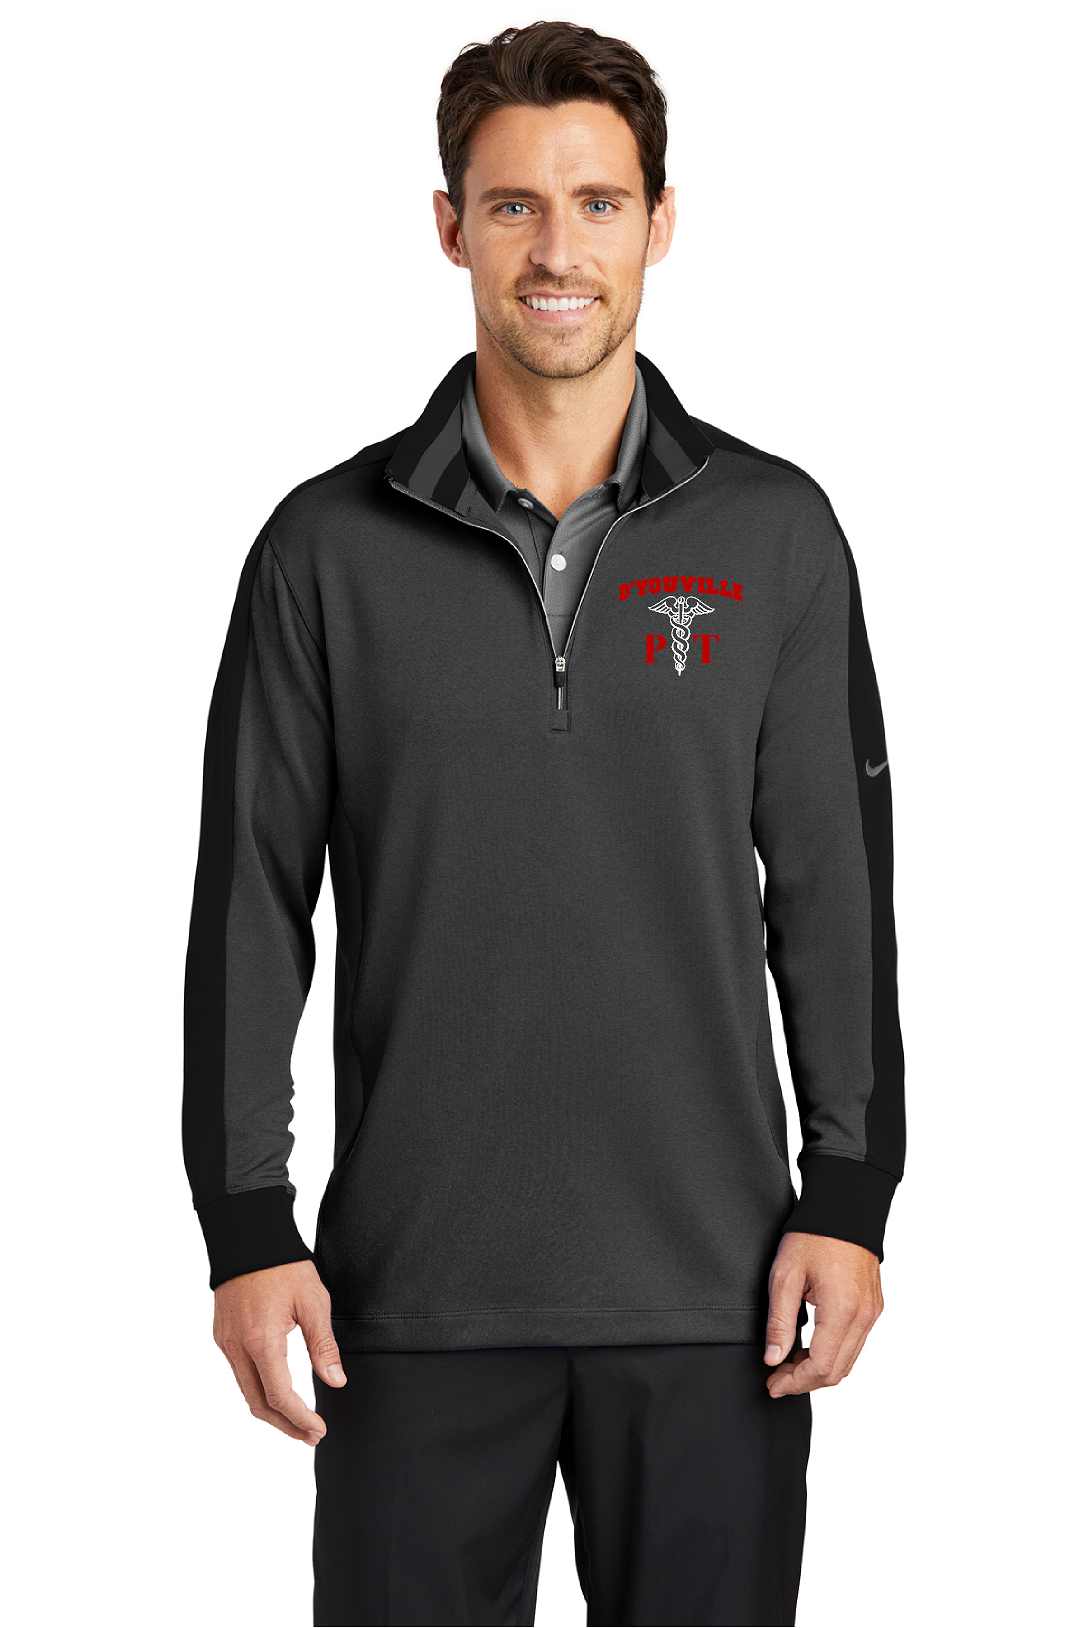 D'Youville Physical Therapy 578673 Nike Dri-FIT 1/2-Zip Cover-Up